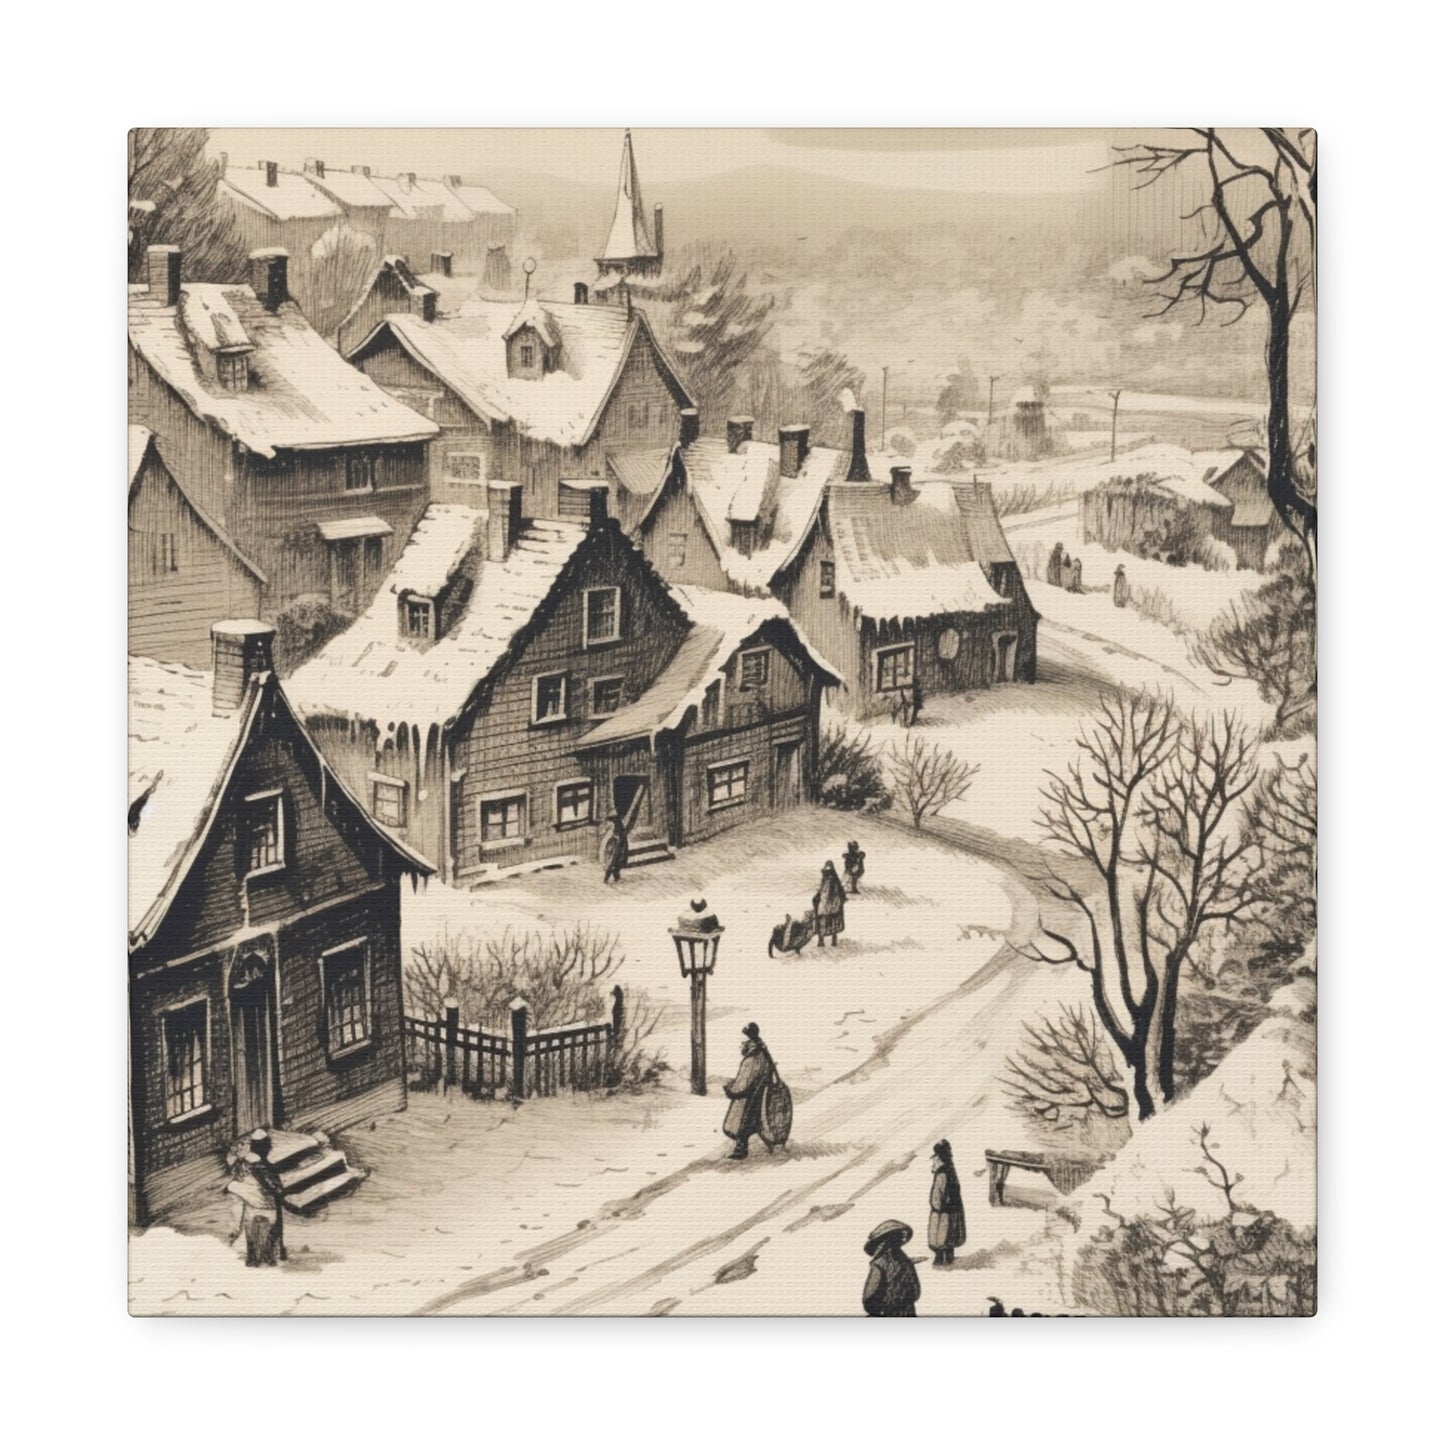 Snowy village scene drawing for Christmas decor